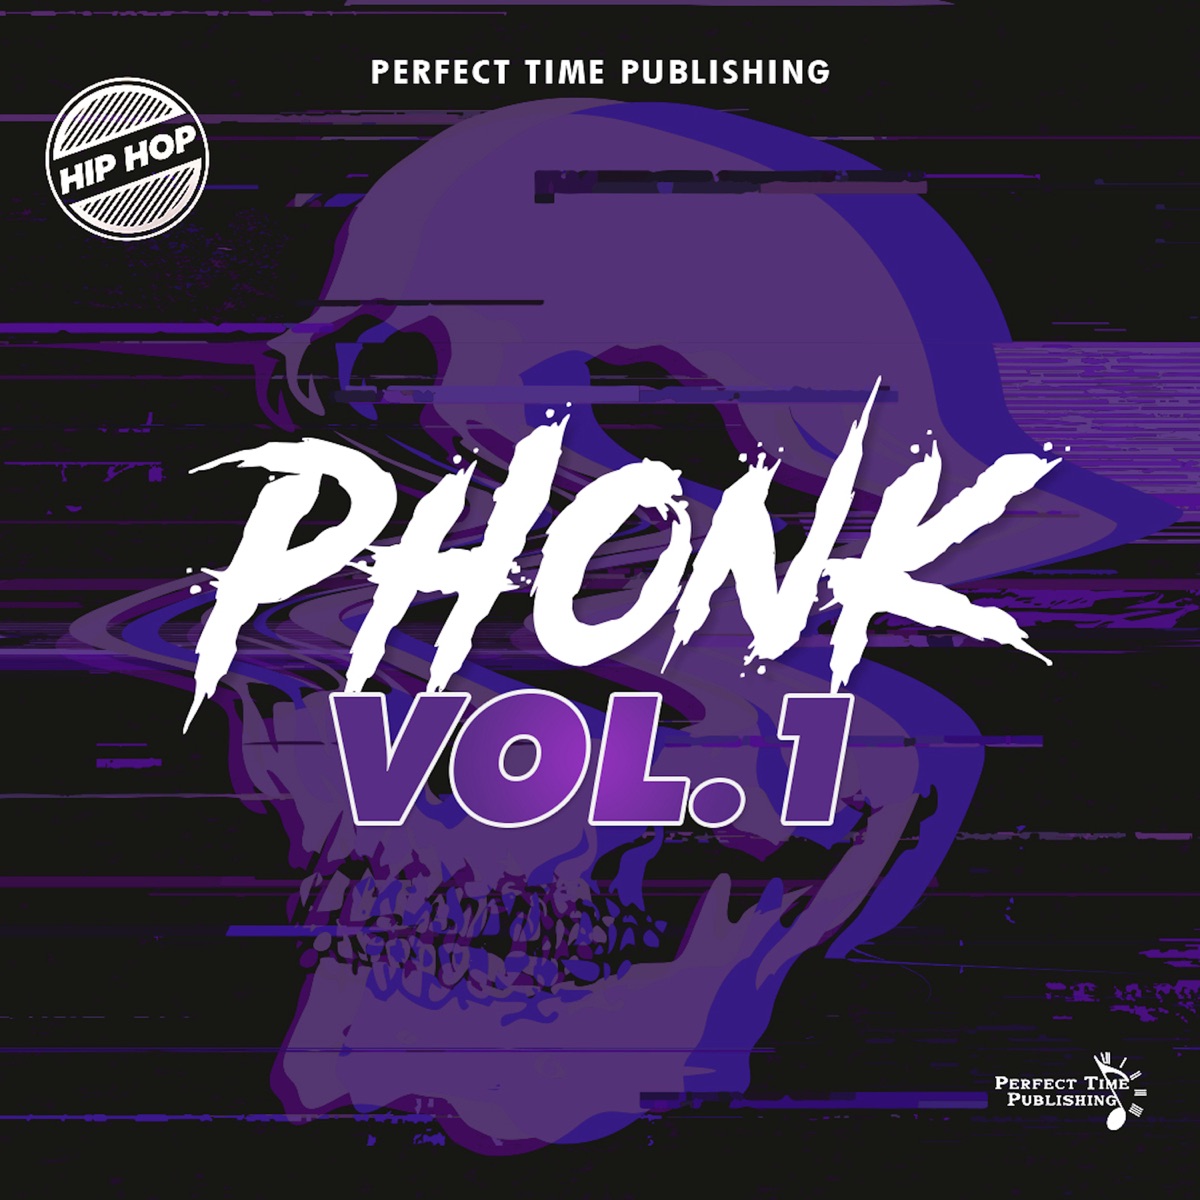 Phonk Music - EP by Chapter 1 CR1 on Apple Music